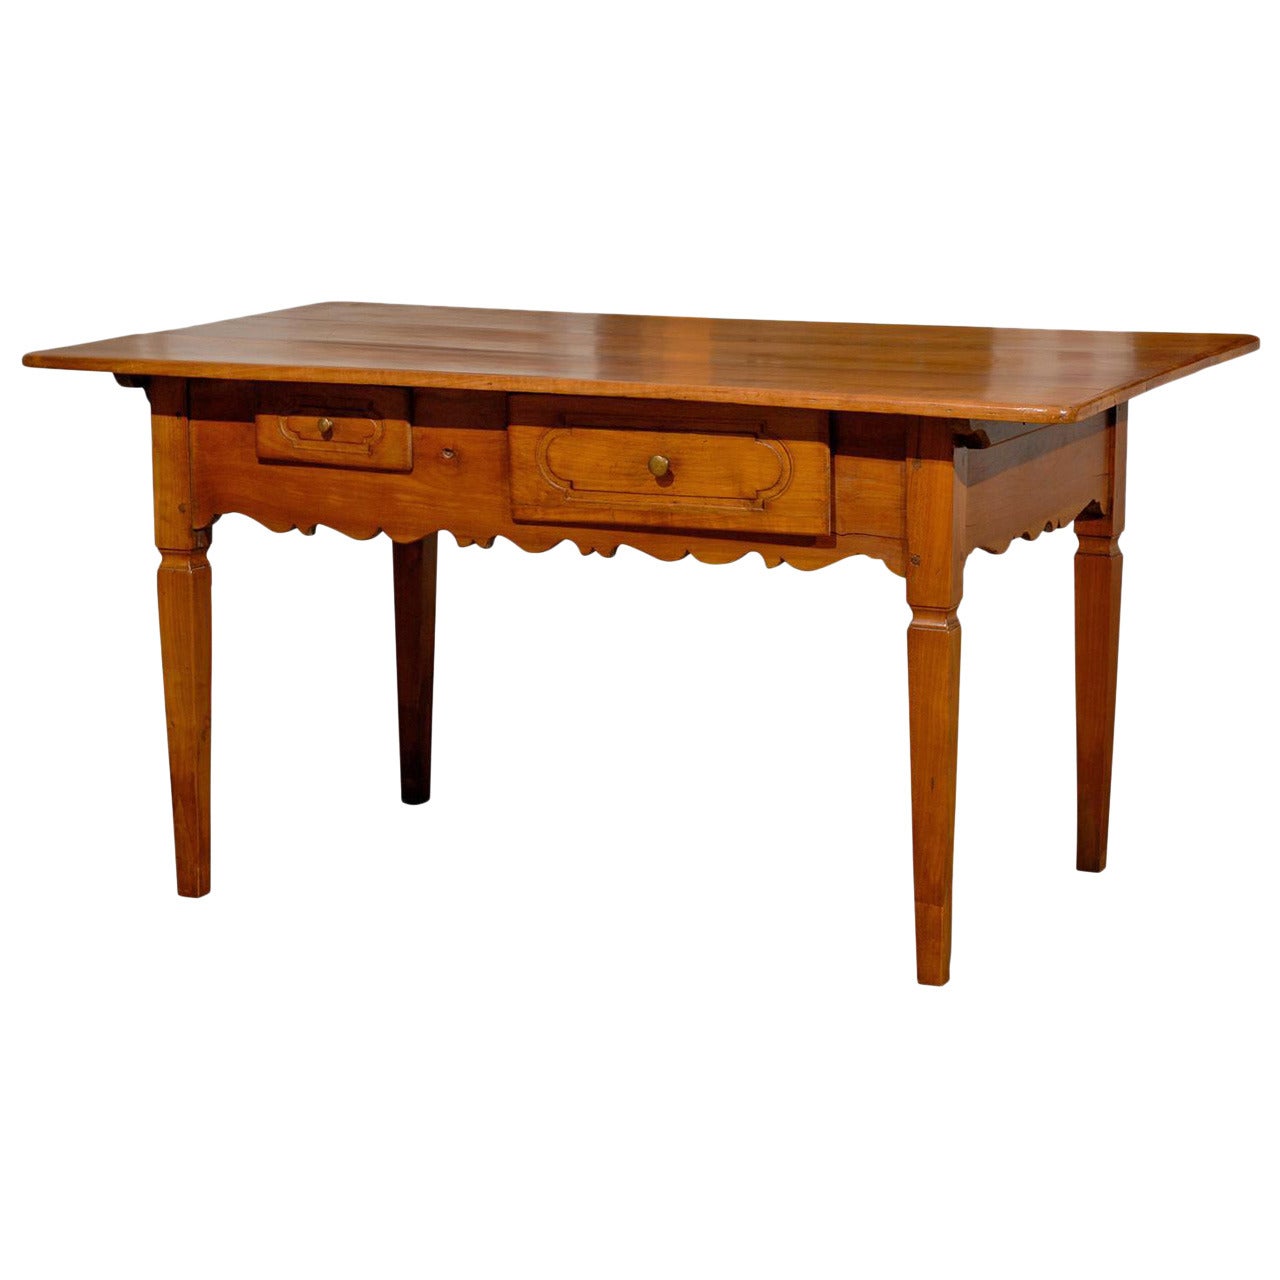 French 1890s Fruitwood Two-Drawer Table with Scalloped Apron and Tapered Legs